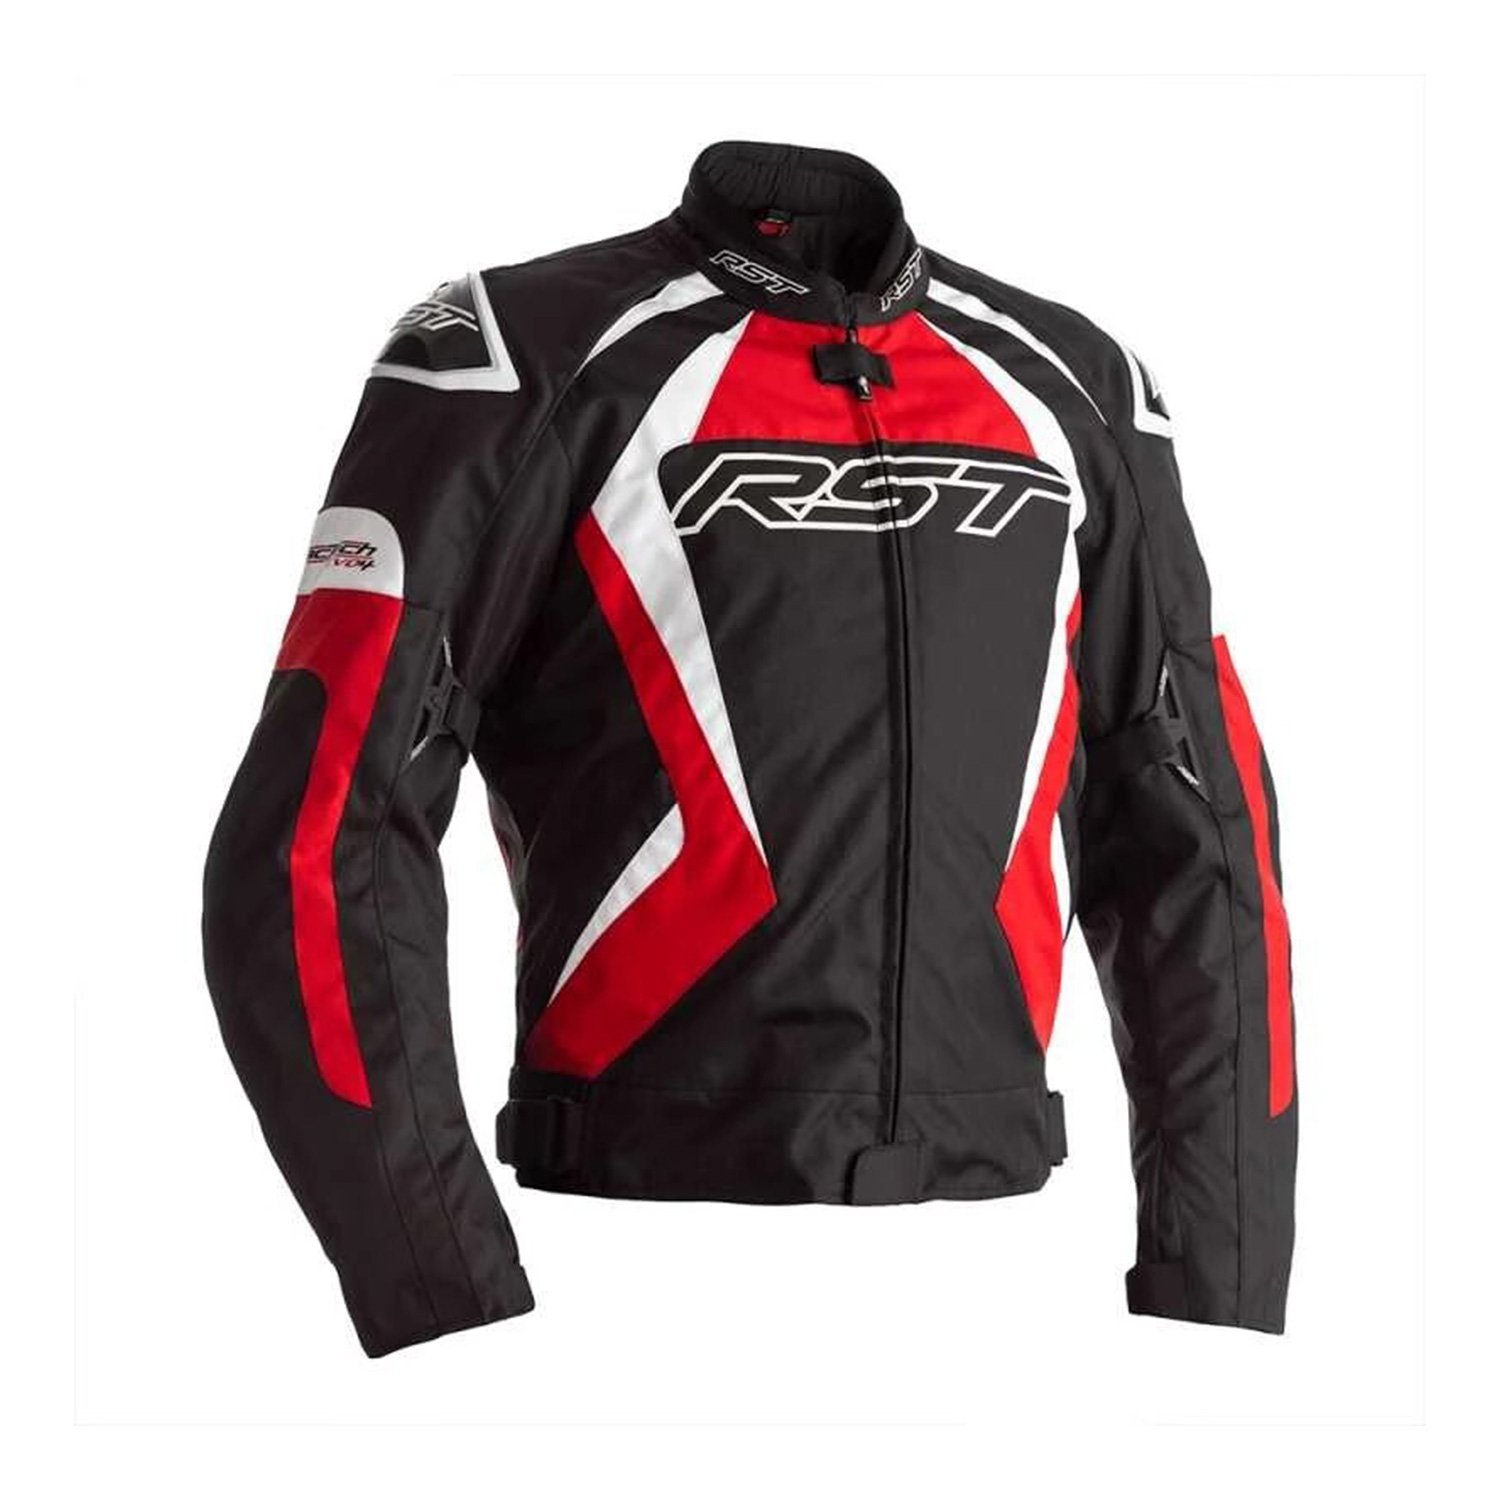 Image of RST Tractech Evo 4 CE Jacket Black Red White Size 42 ID 5056136245810